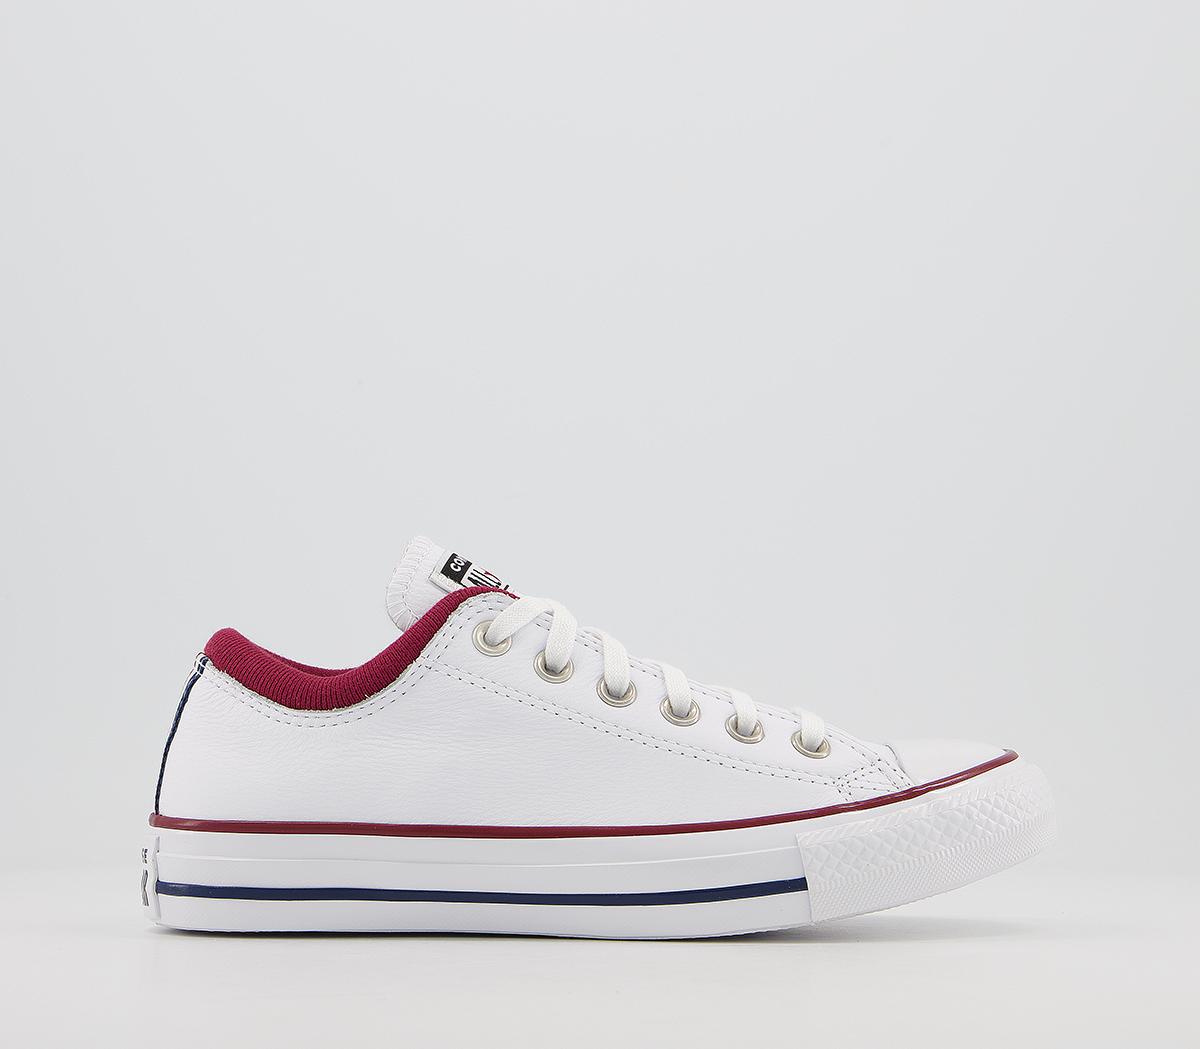 ConverseAll Star Ox Padded Collar TrainersWhite Team Red Navy Exclusive